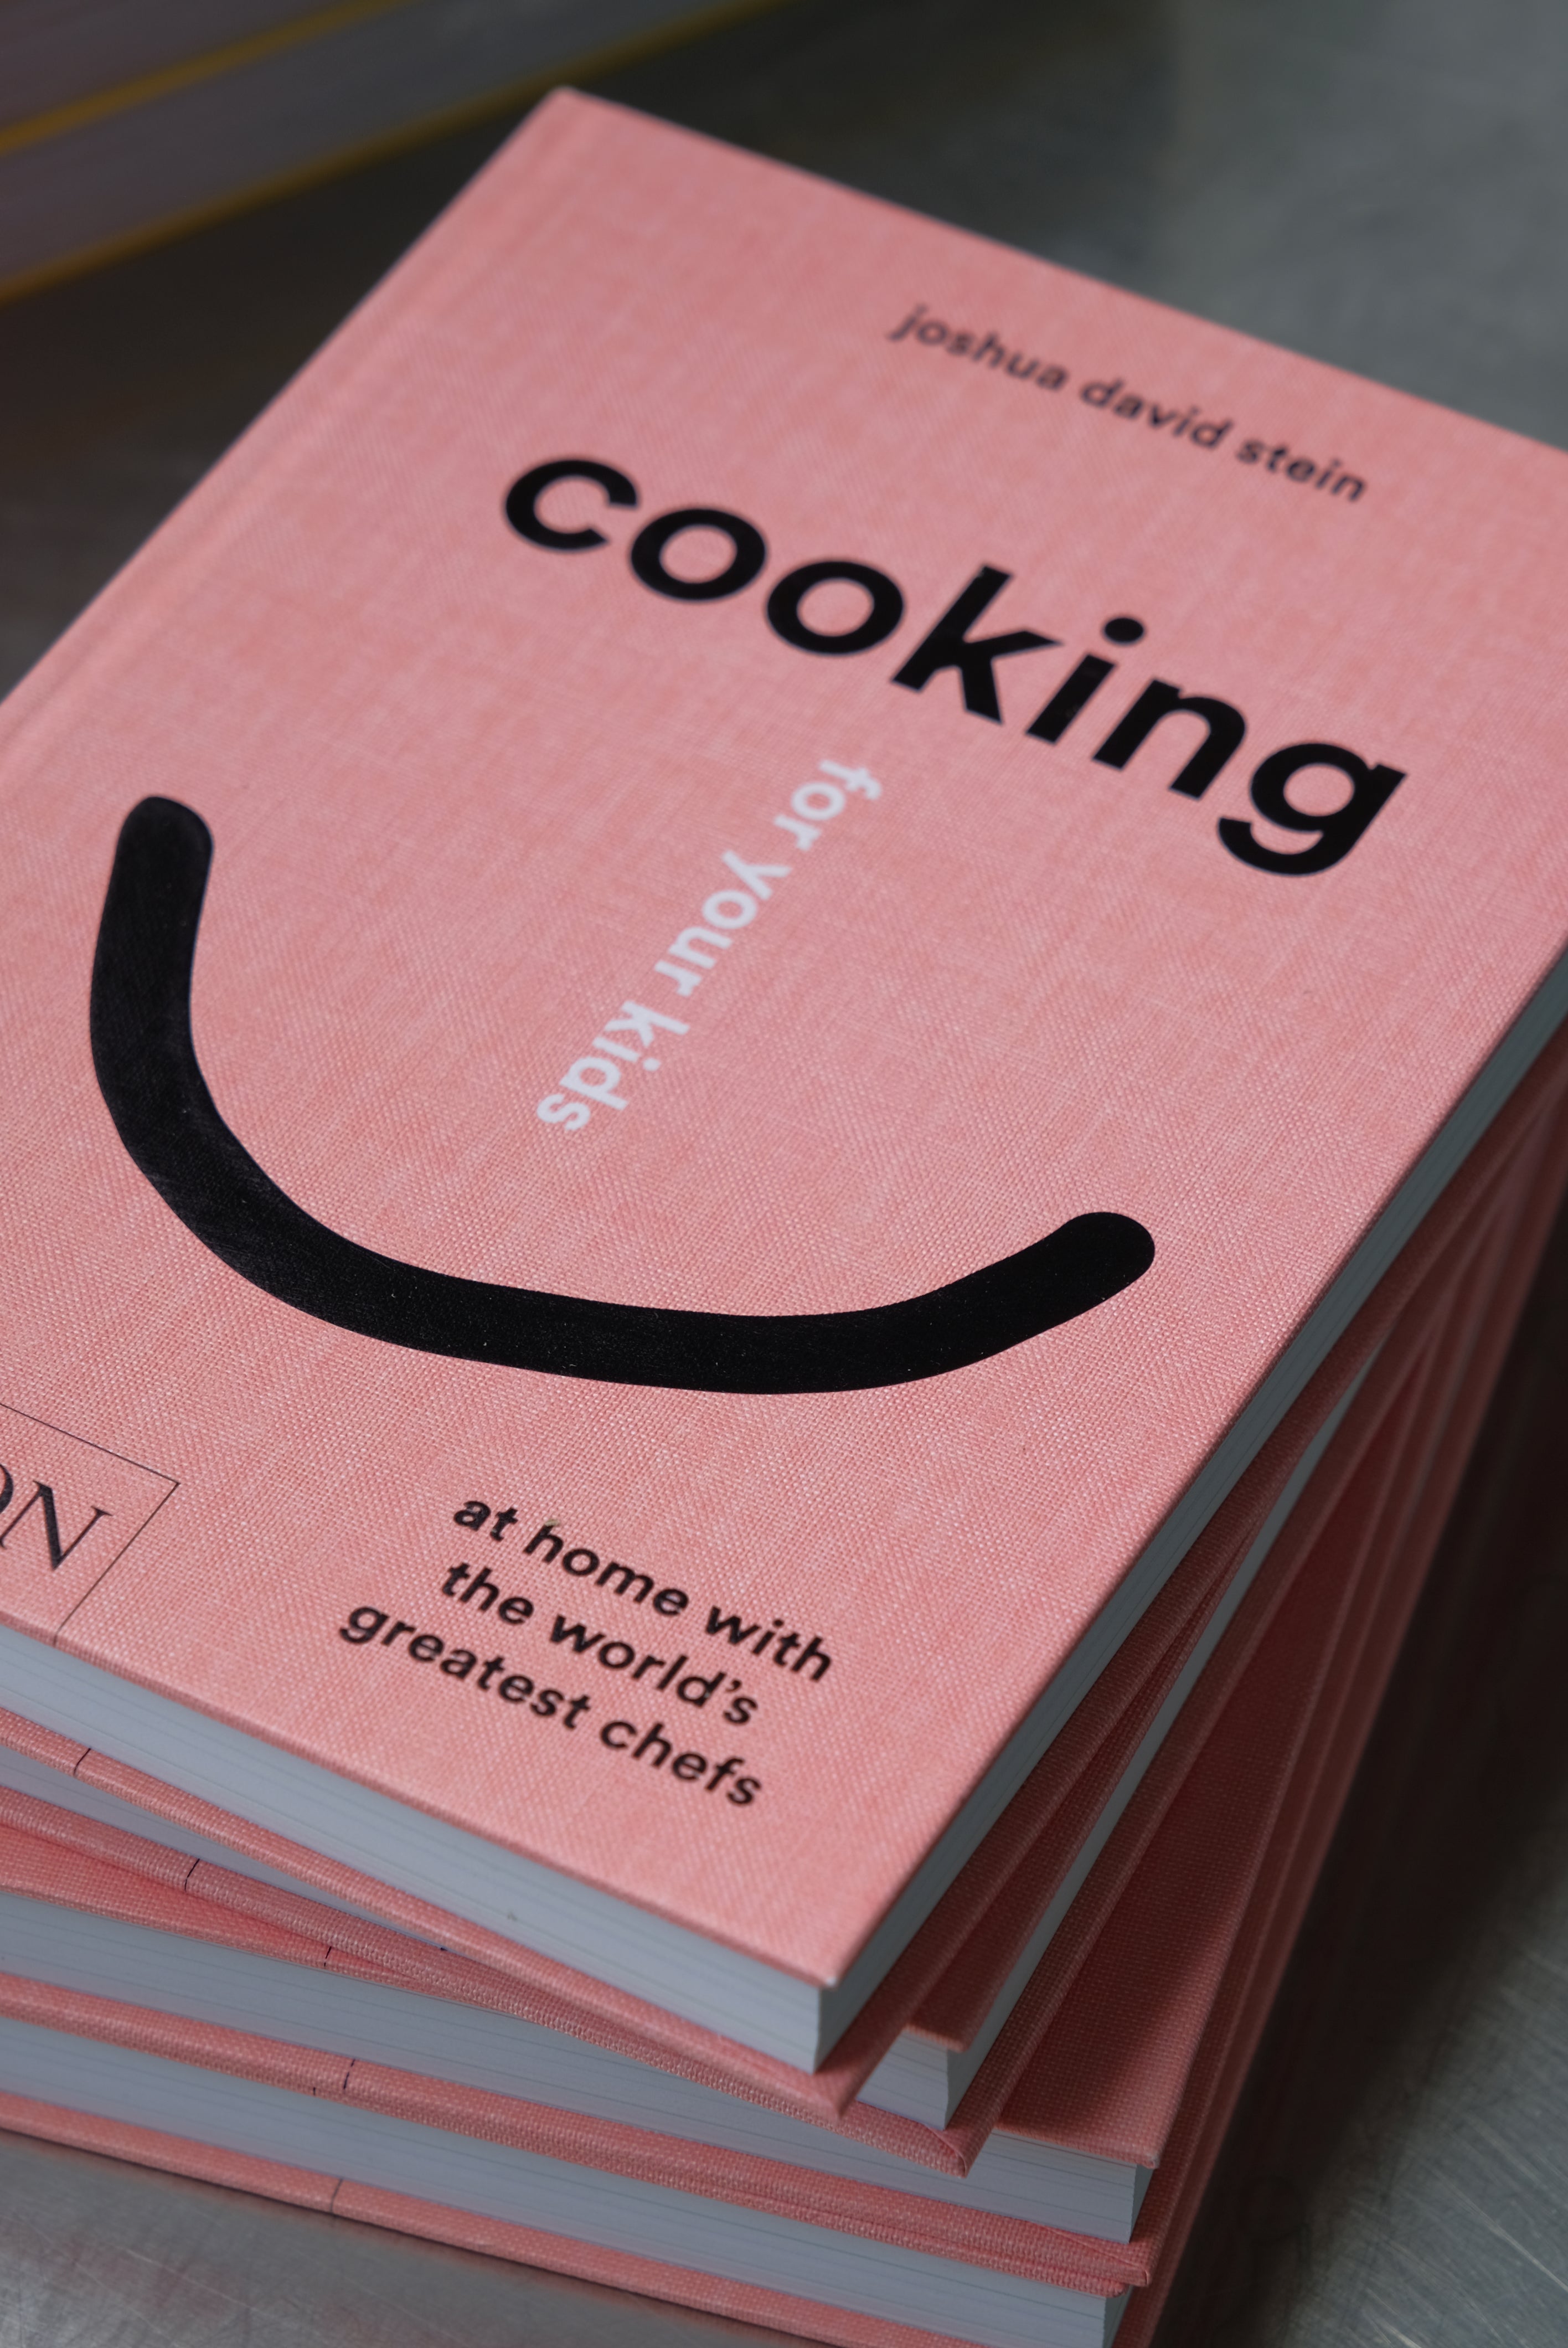 Cooking for your kids-Phaidon-[interior]-[design]-KIOSK48TH